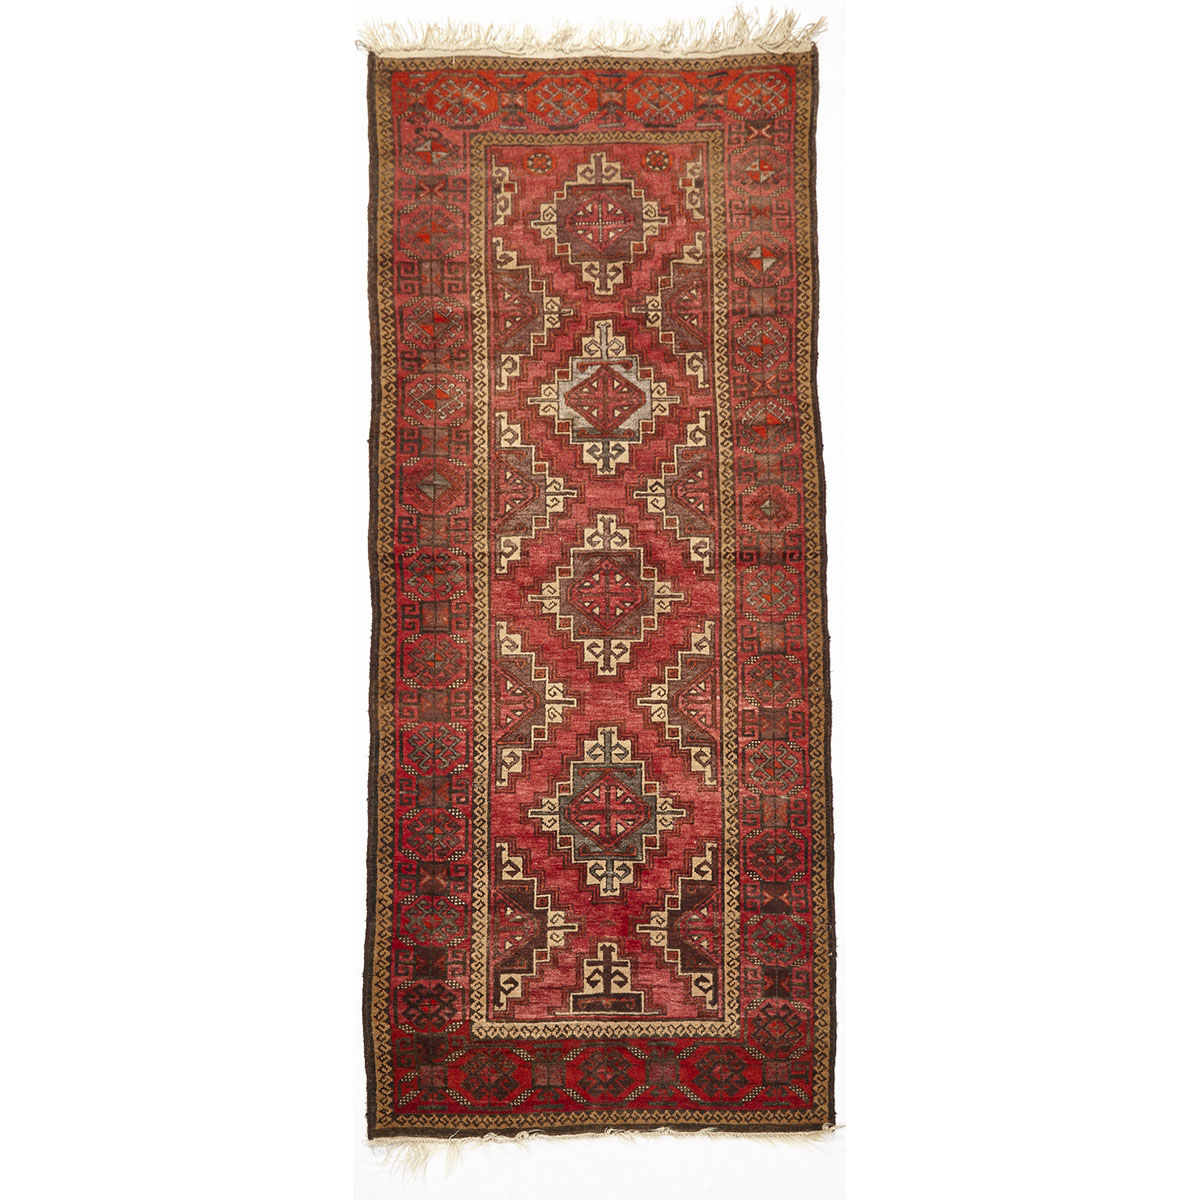 Belouch Rug, mid./late 20th century